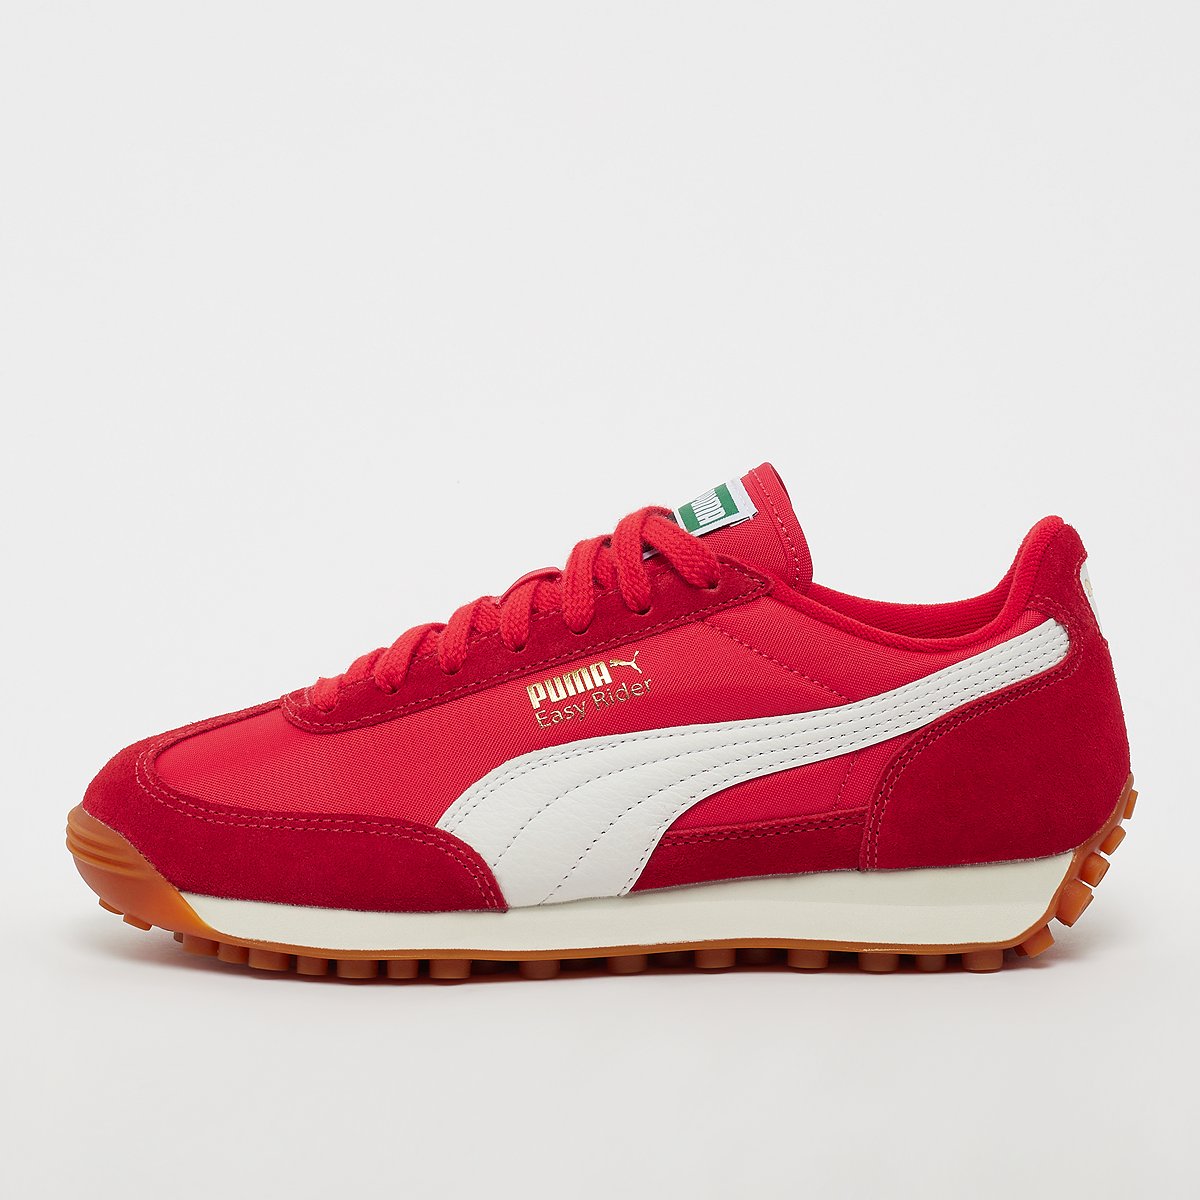 Easy Rider Vintage red/white, Puma, Footwear, red/white, taille: 41